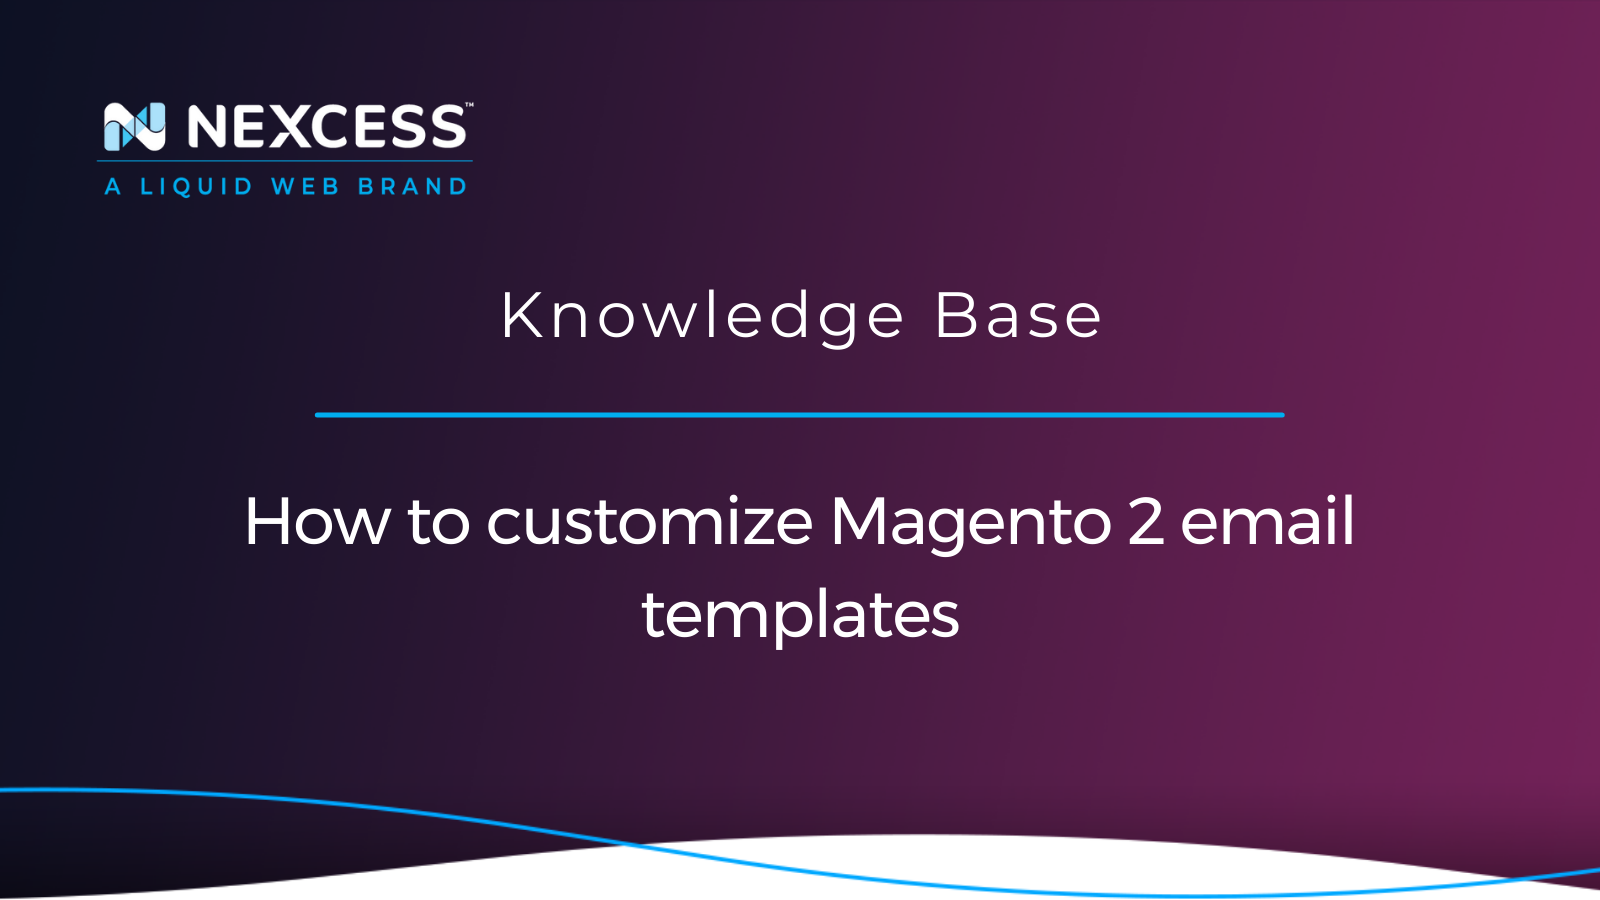 How to Customize Magento 2 Email Templates Nexcess